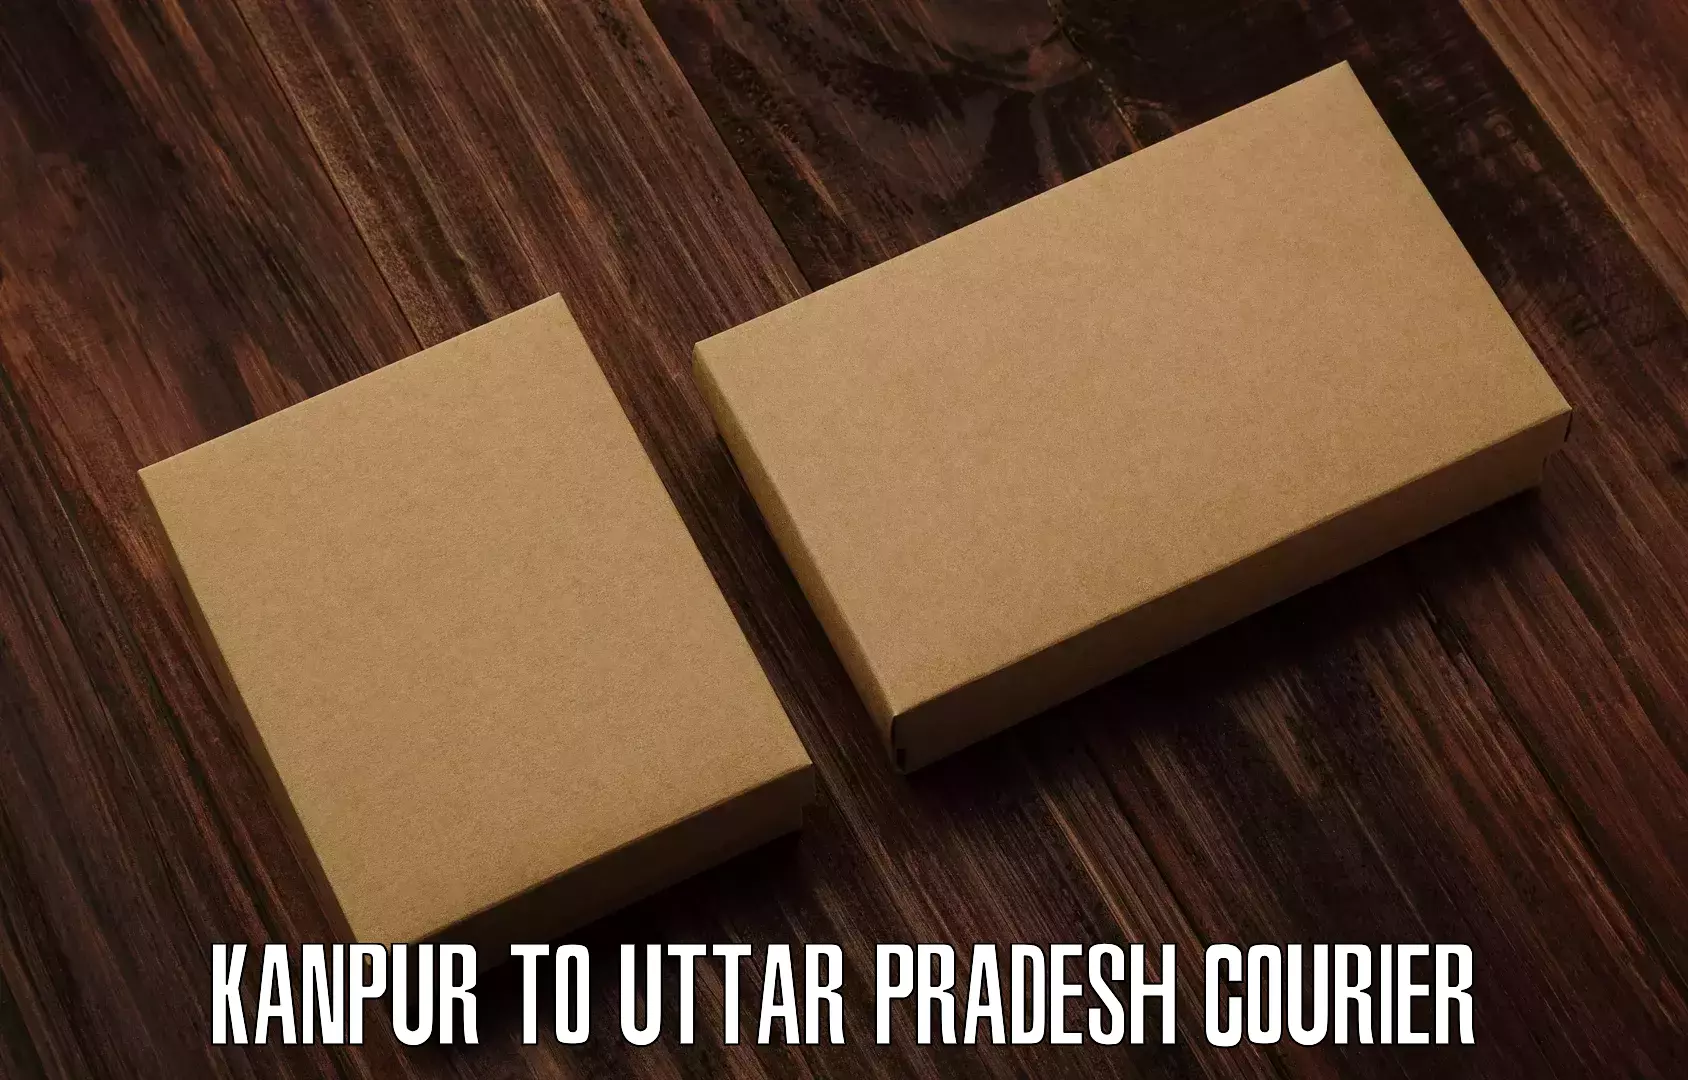 On-demand delivery Kanpur to Lalitpur